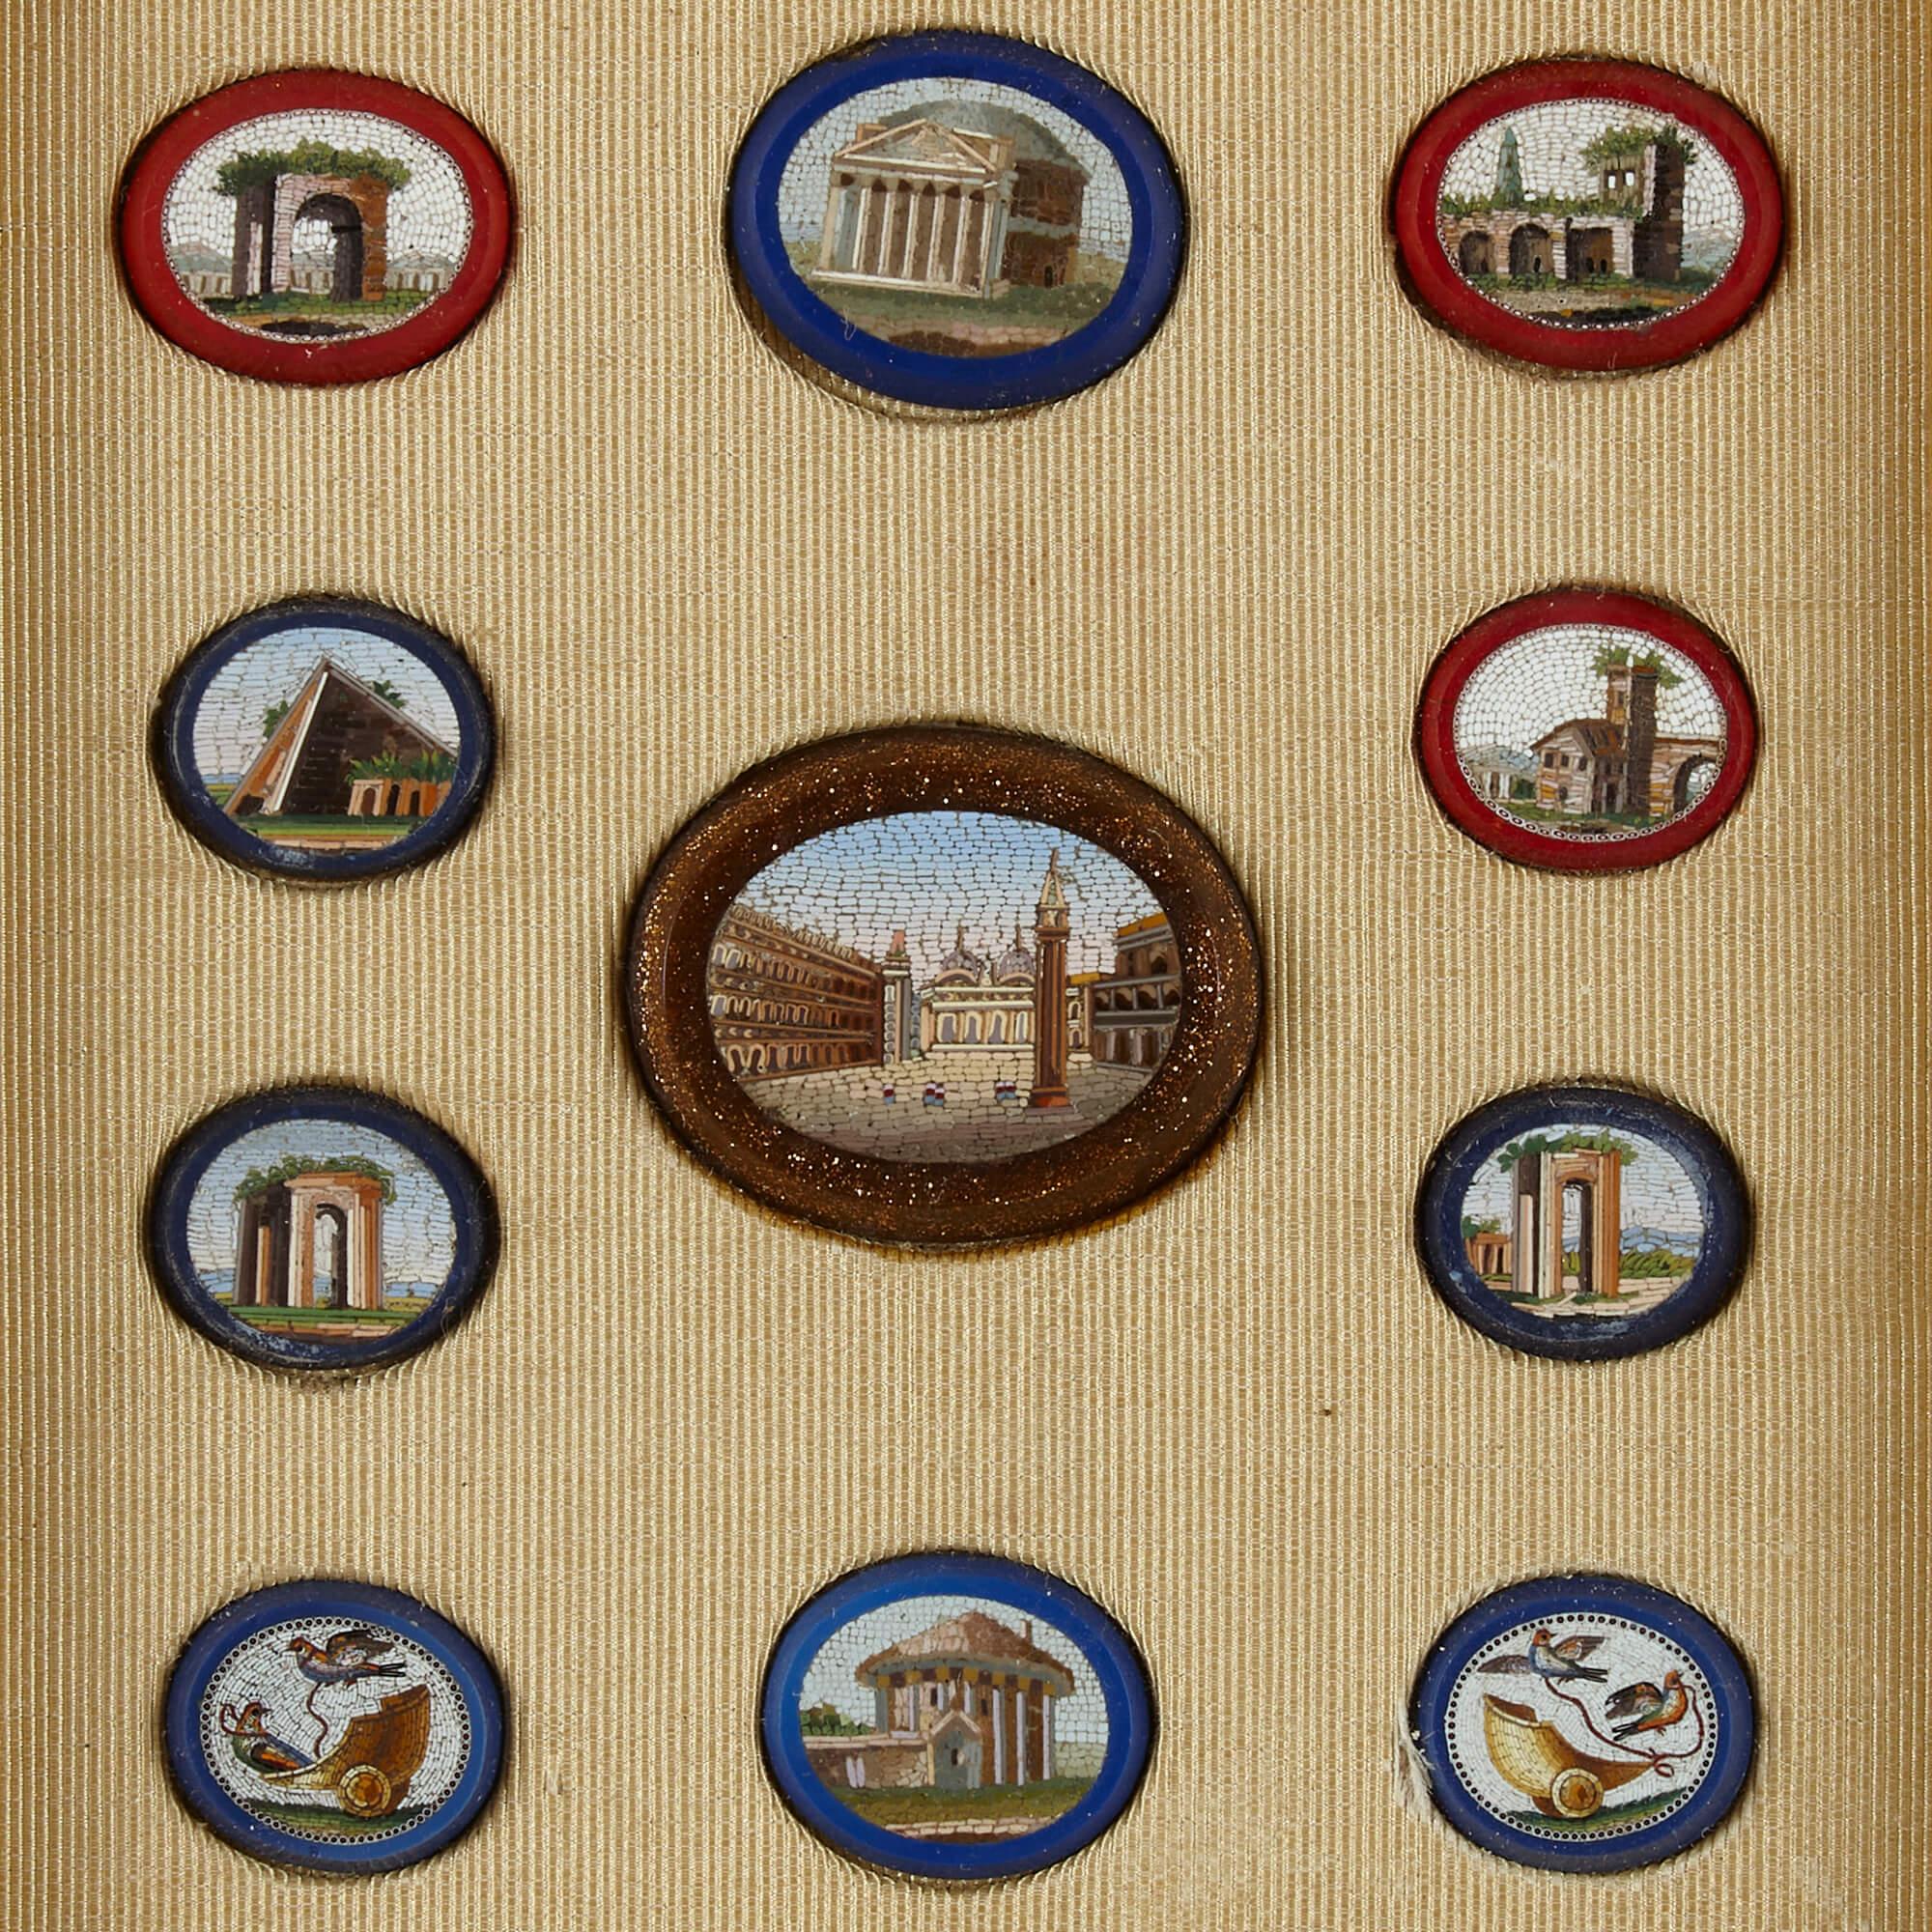 A framed set of eleven micromosaic plaques of Italian monuments
Italian, 19th century
Measures: Height 22cm, width 21.5cm, depth 2.5cm

Made during the Grand Tour, as a way for aristocratic visitors to Italy to remember the beautiful and